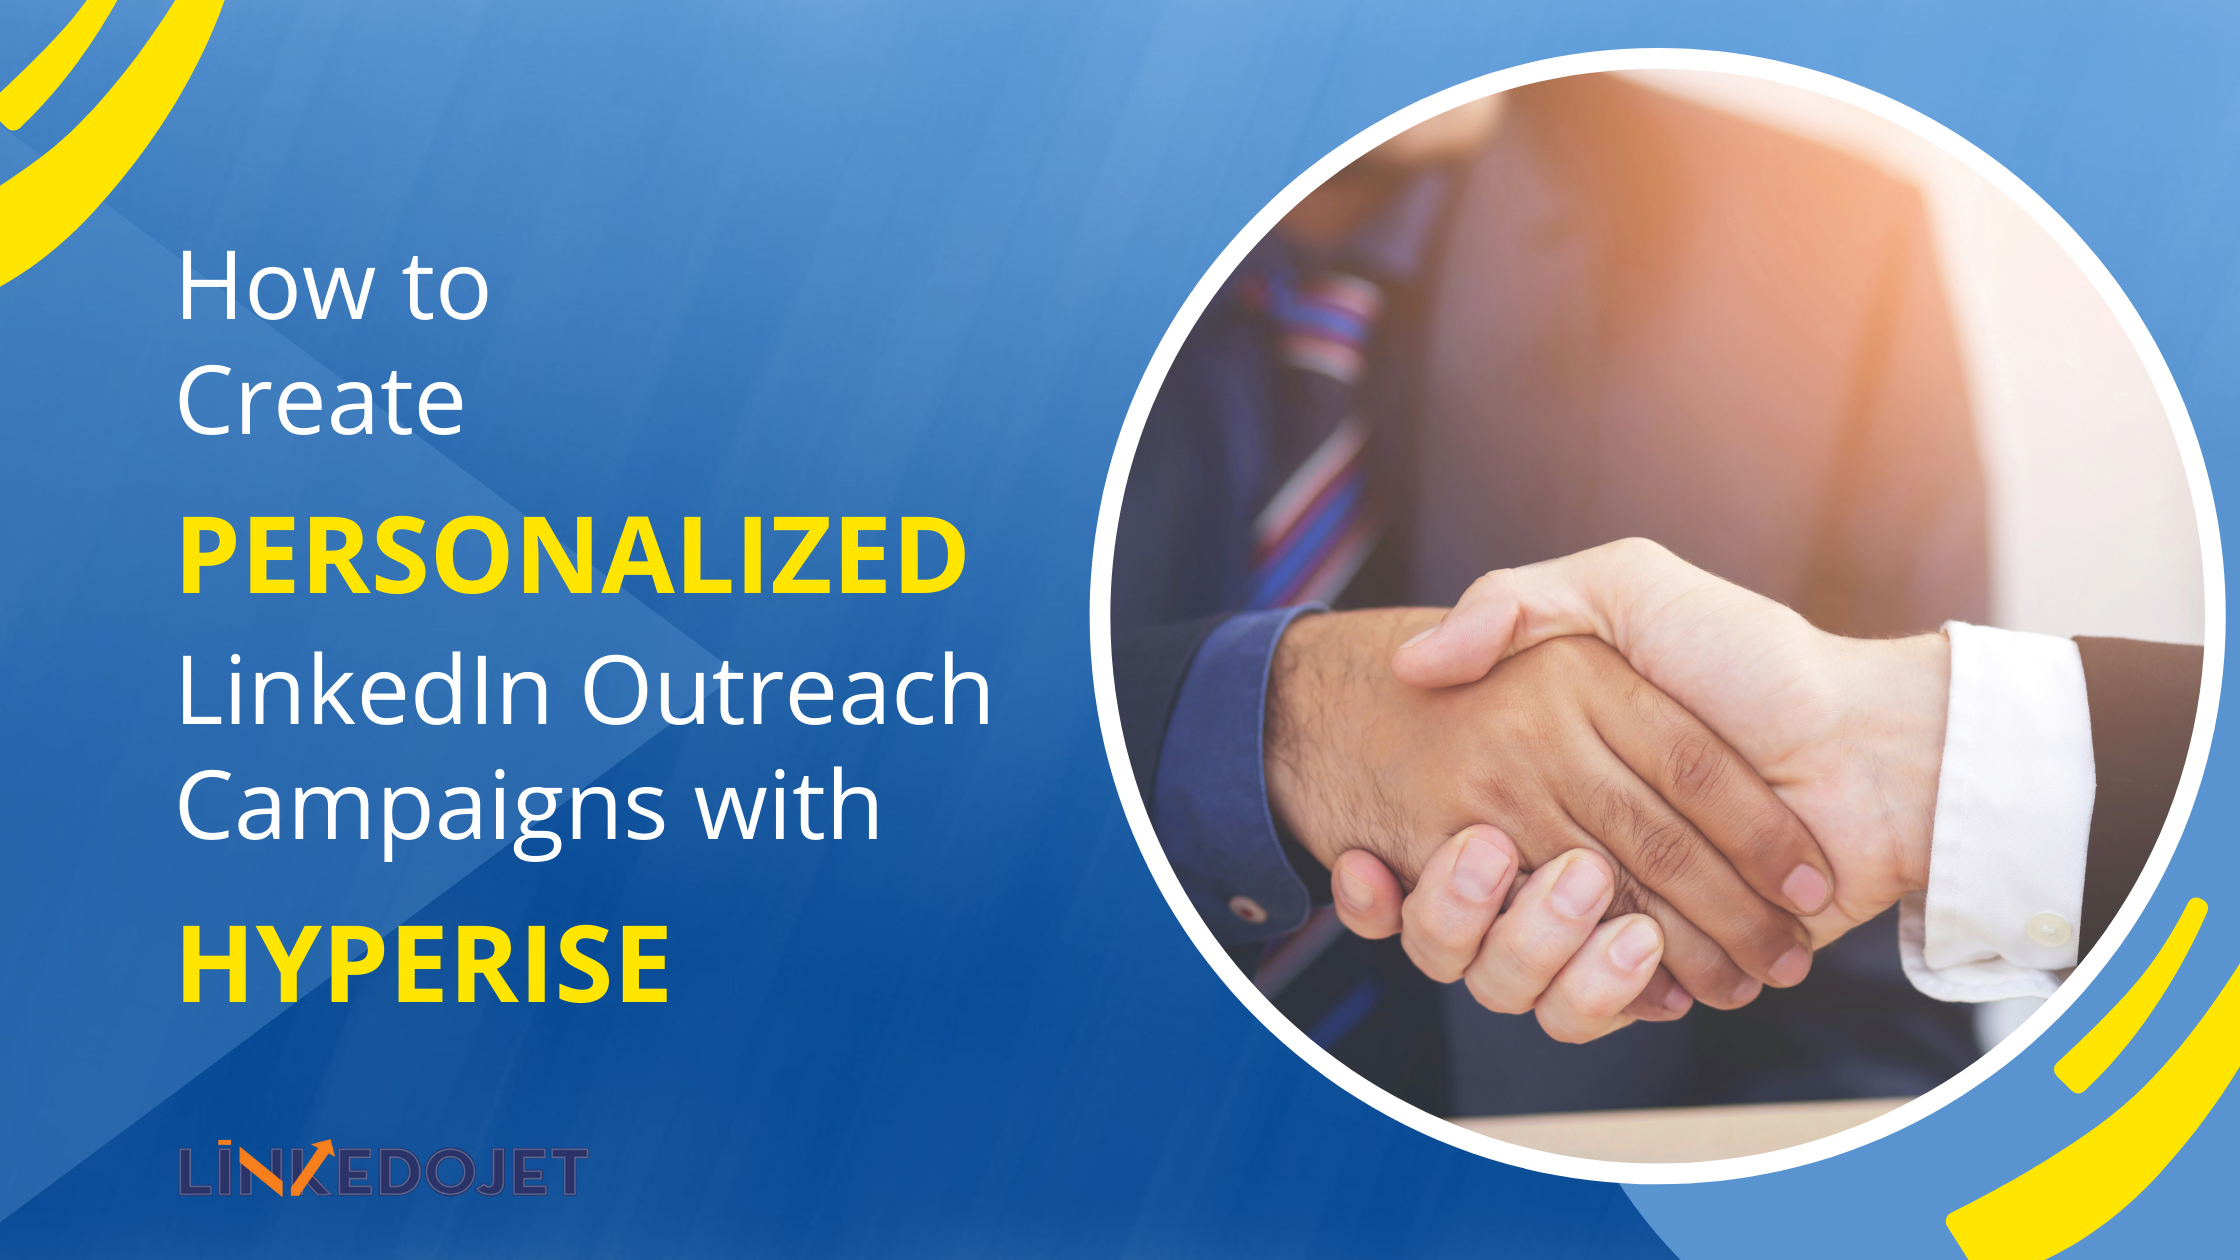 How to Create Personalized Outreach Campaigns on LinkedIn with Hyperise?